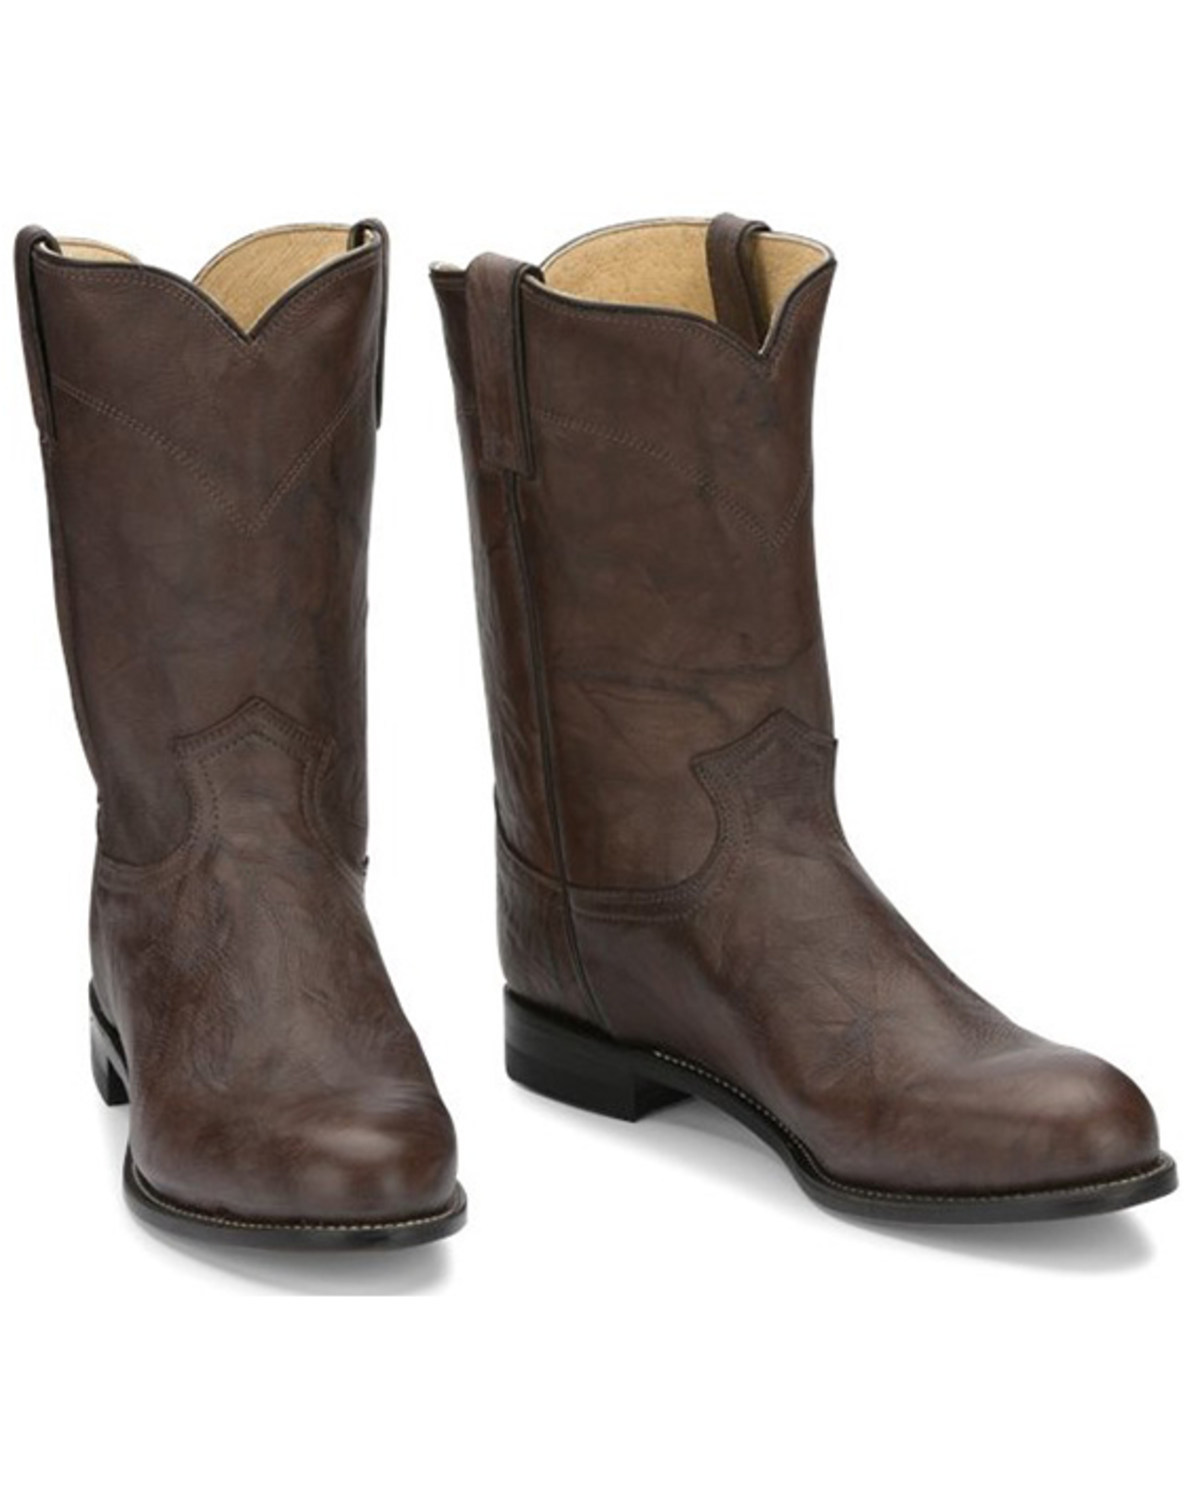 roper style boots